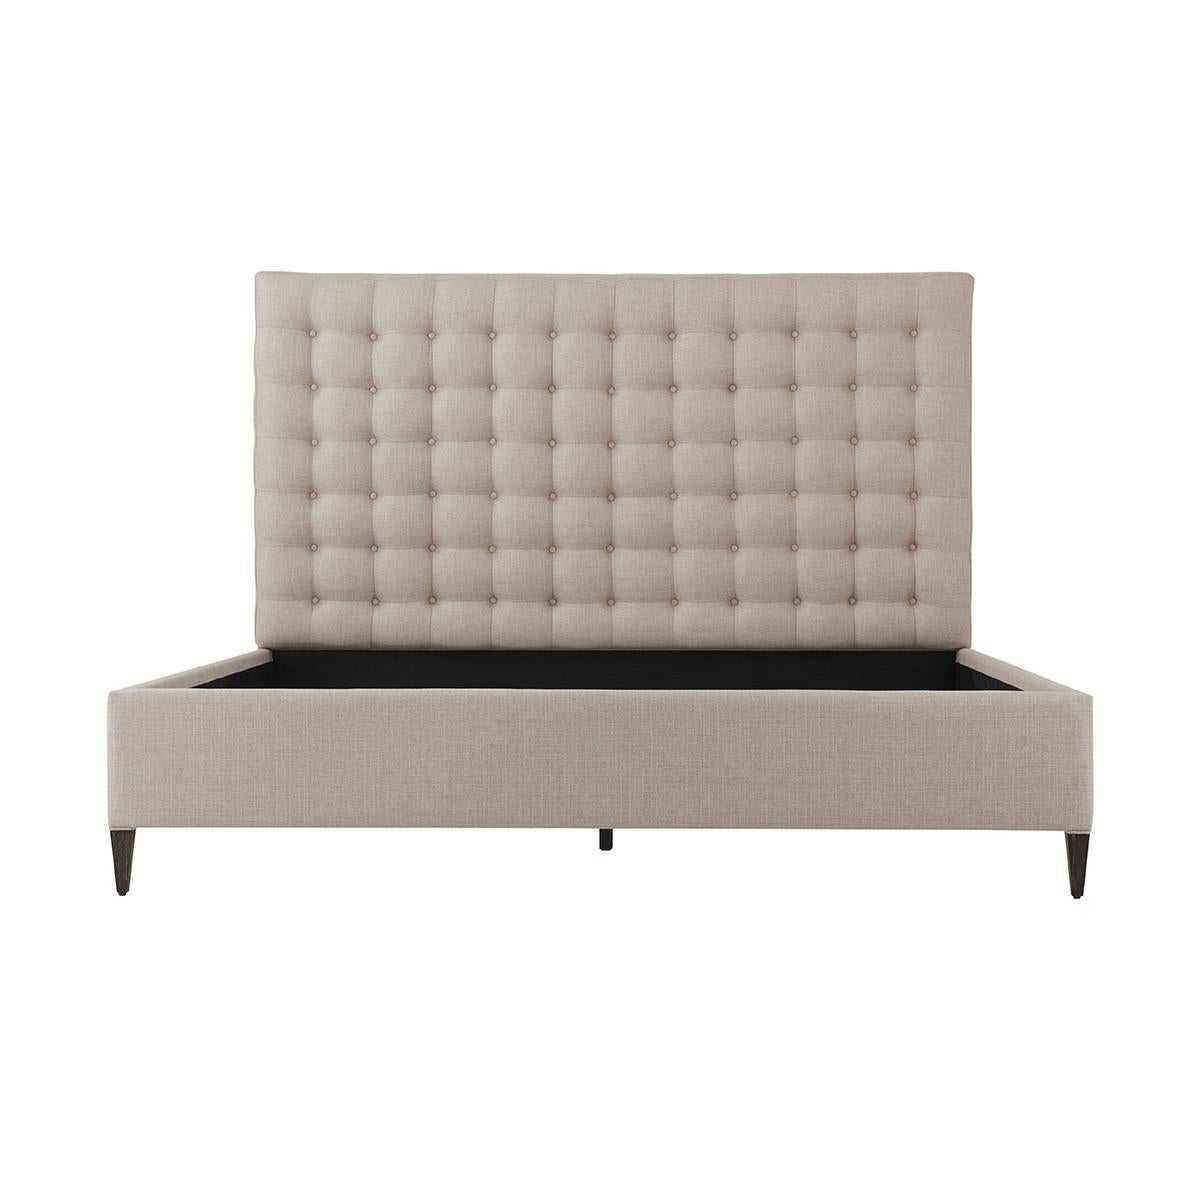 With a biscuit tufted headboard with upholstered rails and raised on square tapered legs.

Dimensions: 81